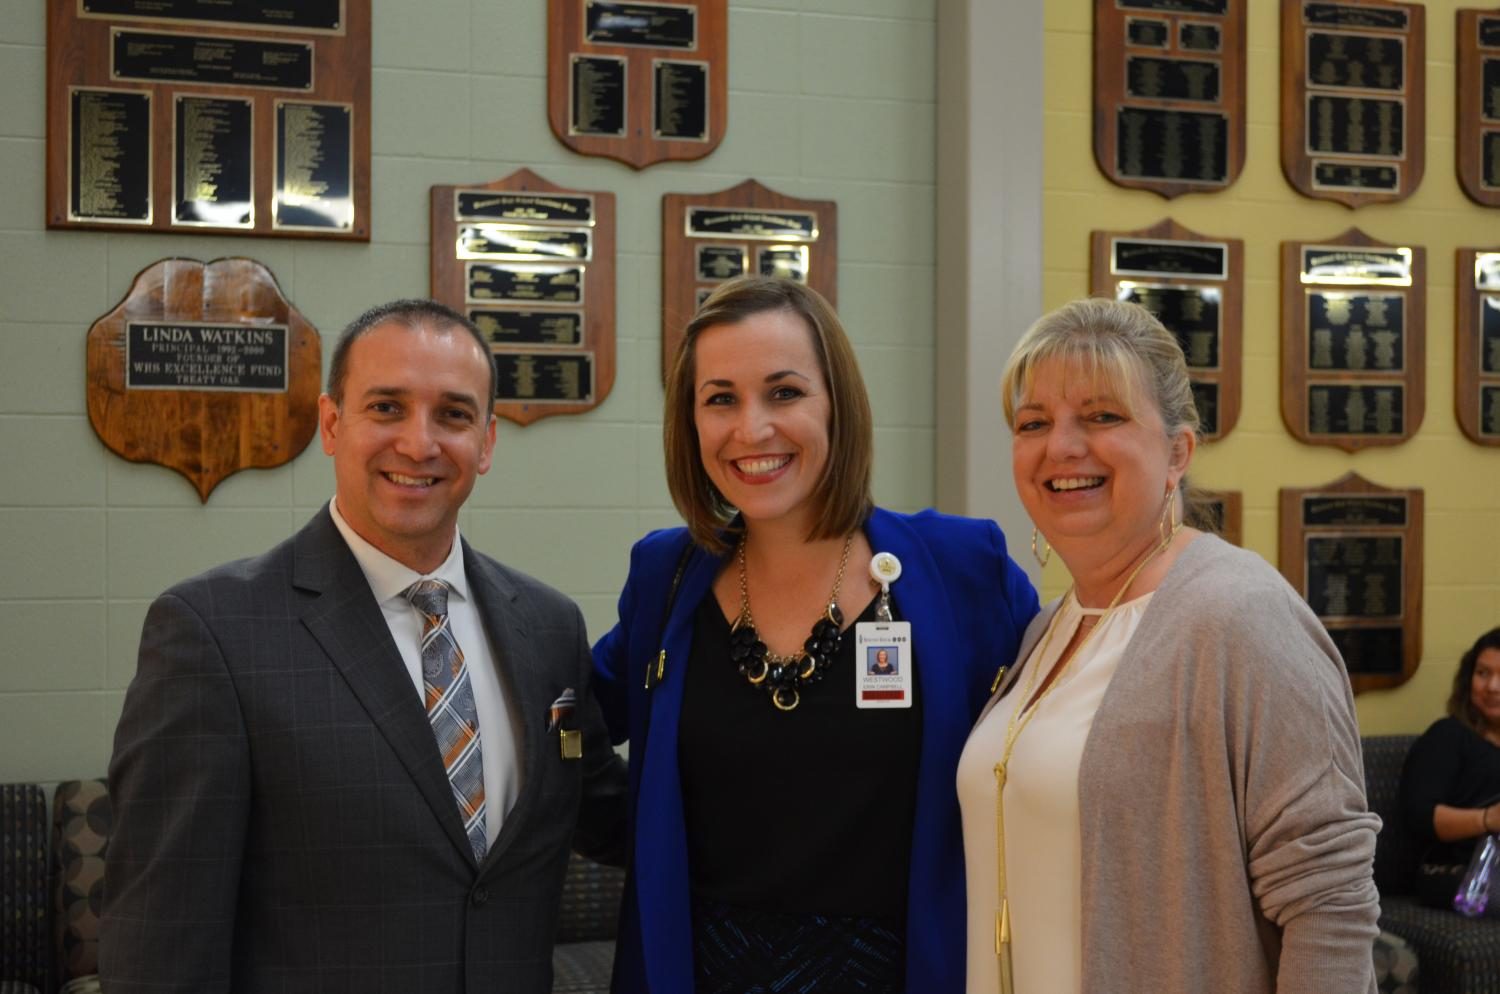 Principal Mr. Mario Acosta, Assistant Principal Erin Campbell, and Associate Principal Kim Hodge smile as they welcome the parents for this year’s Open House